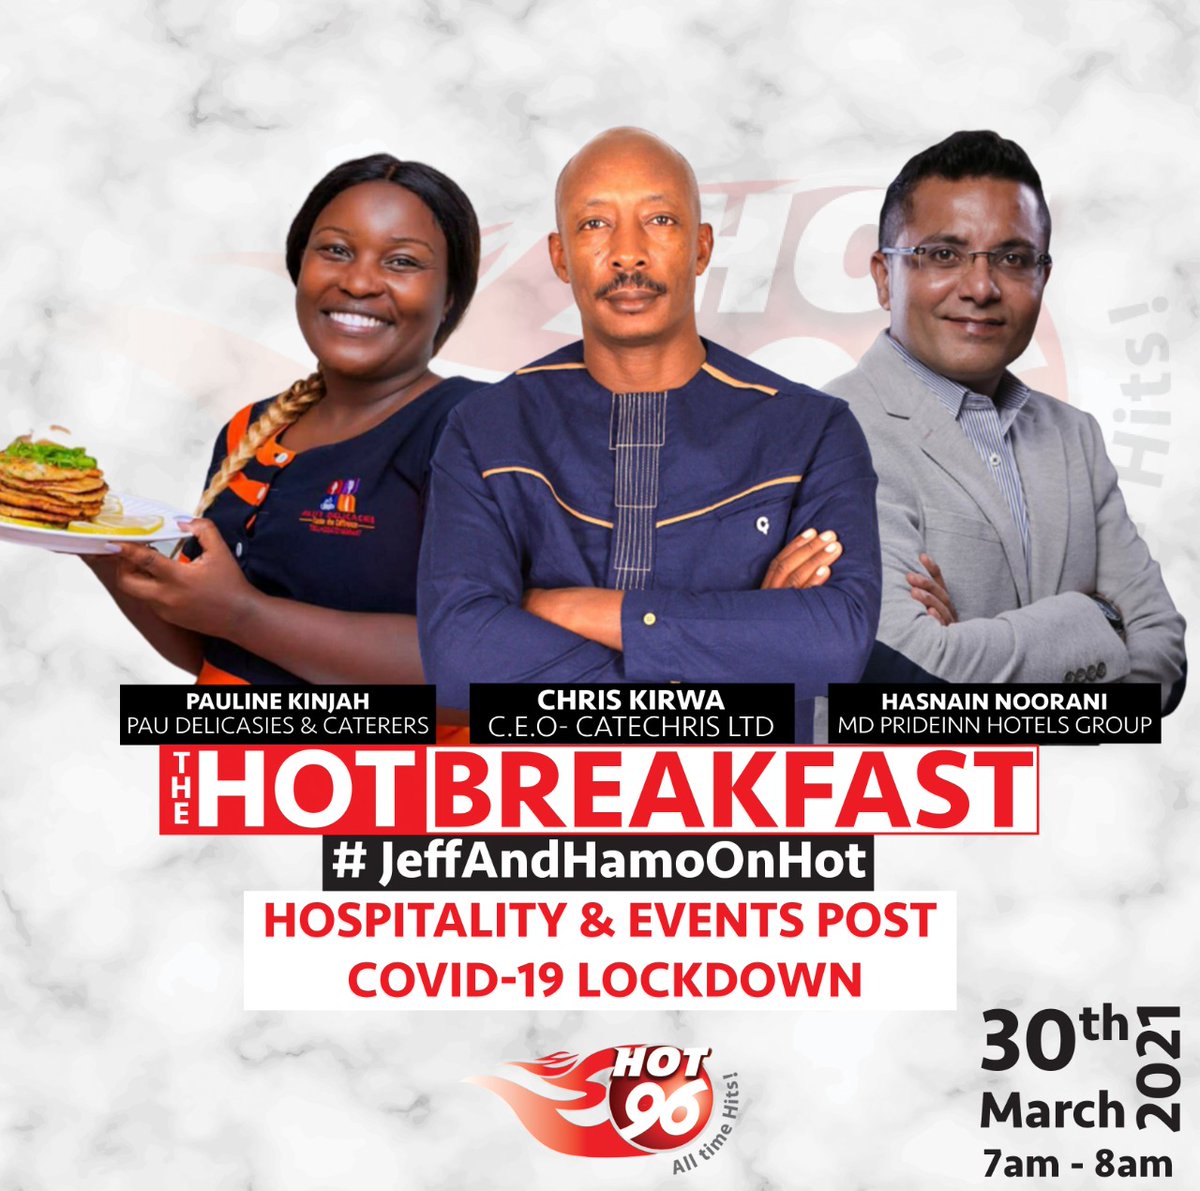 Tune In To The Hot Breakfast Show On Hot 96 With #JeffAndHamoOnHot Tomorrow From 7 A.M. To 8 A.M. Our Managing Director, Hasnain Noorani, Will Be Sharing His Points Of View On Hospitality & Events Post Covid-19 Lockdown Alongside Other Honorable Mentions. 
#JeffAndHamoOnHot